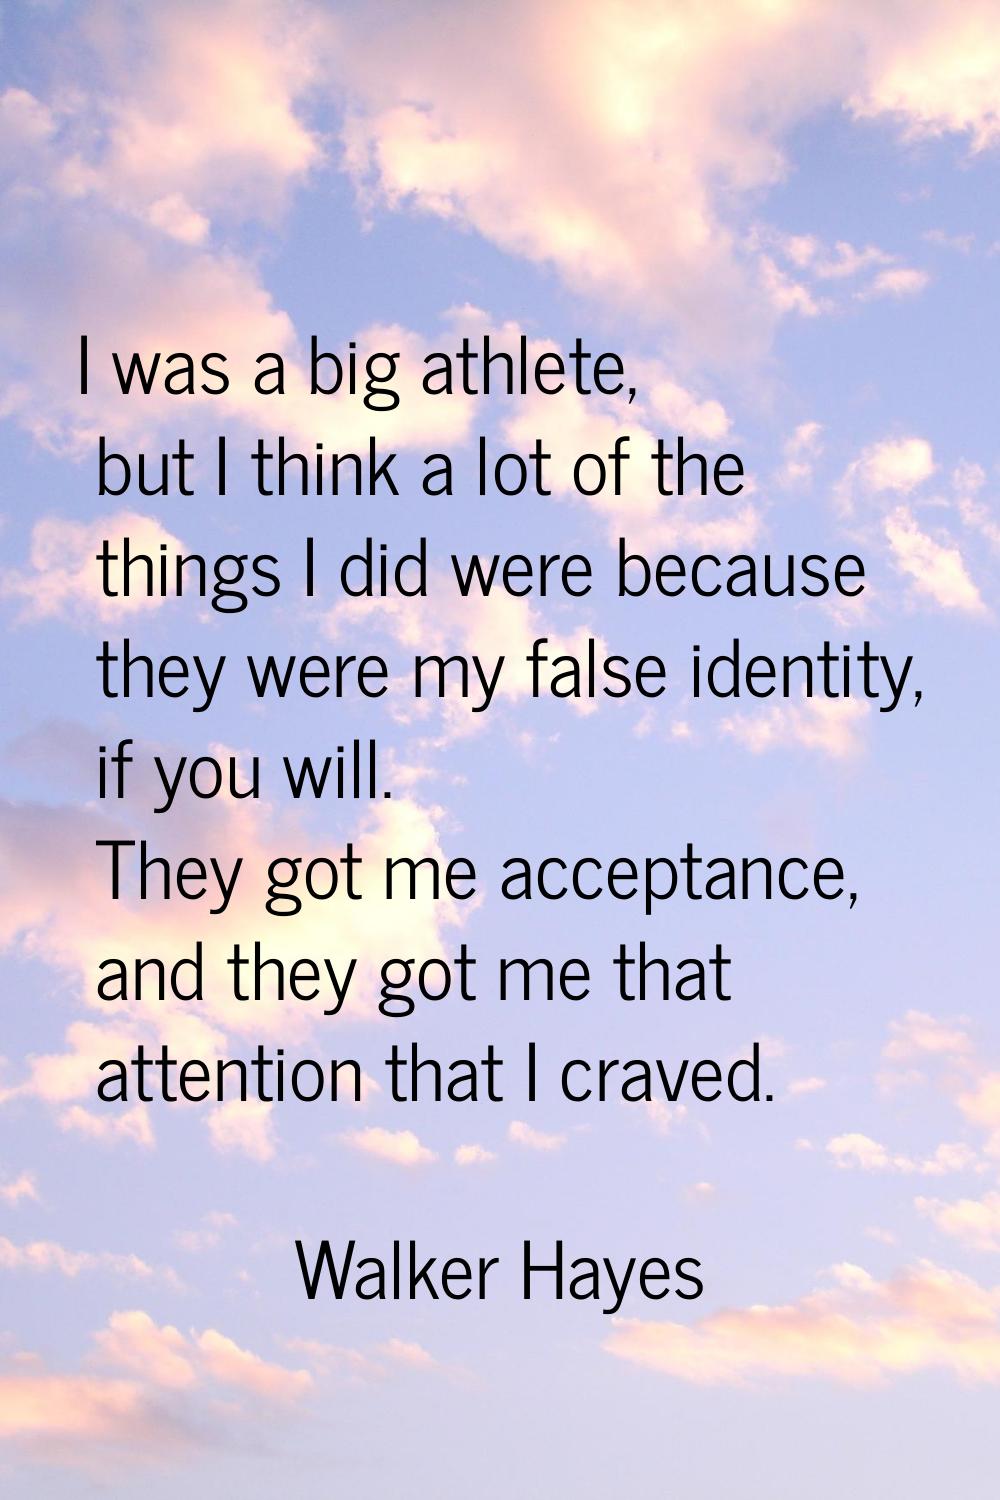 I was a big athlete, but I think a lot of the things I did were because they were my false identity